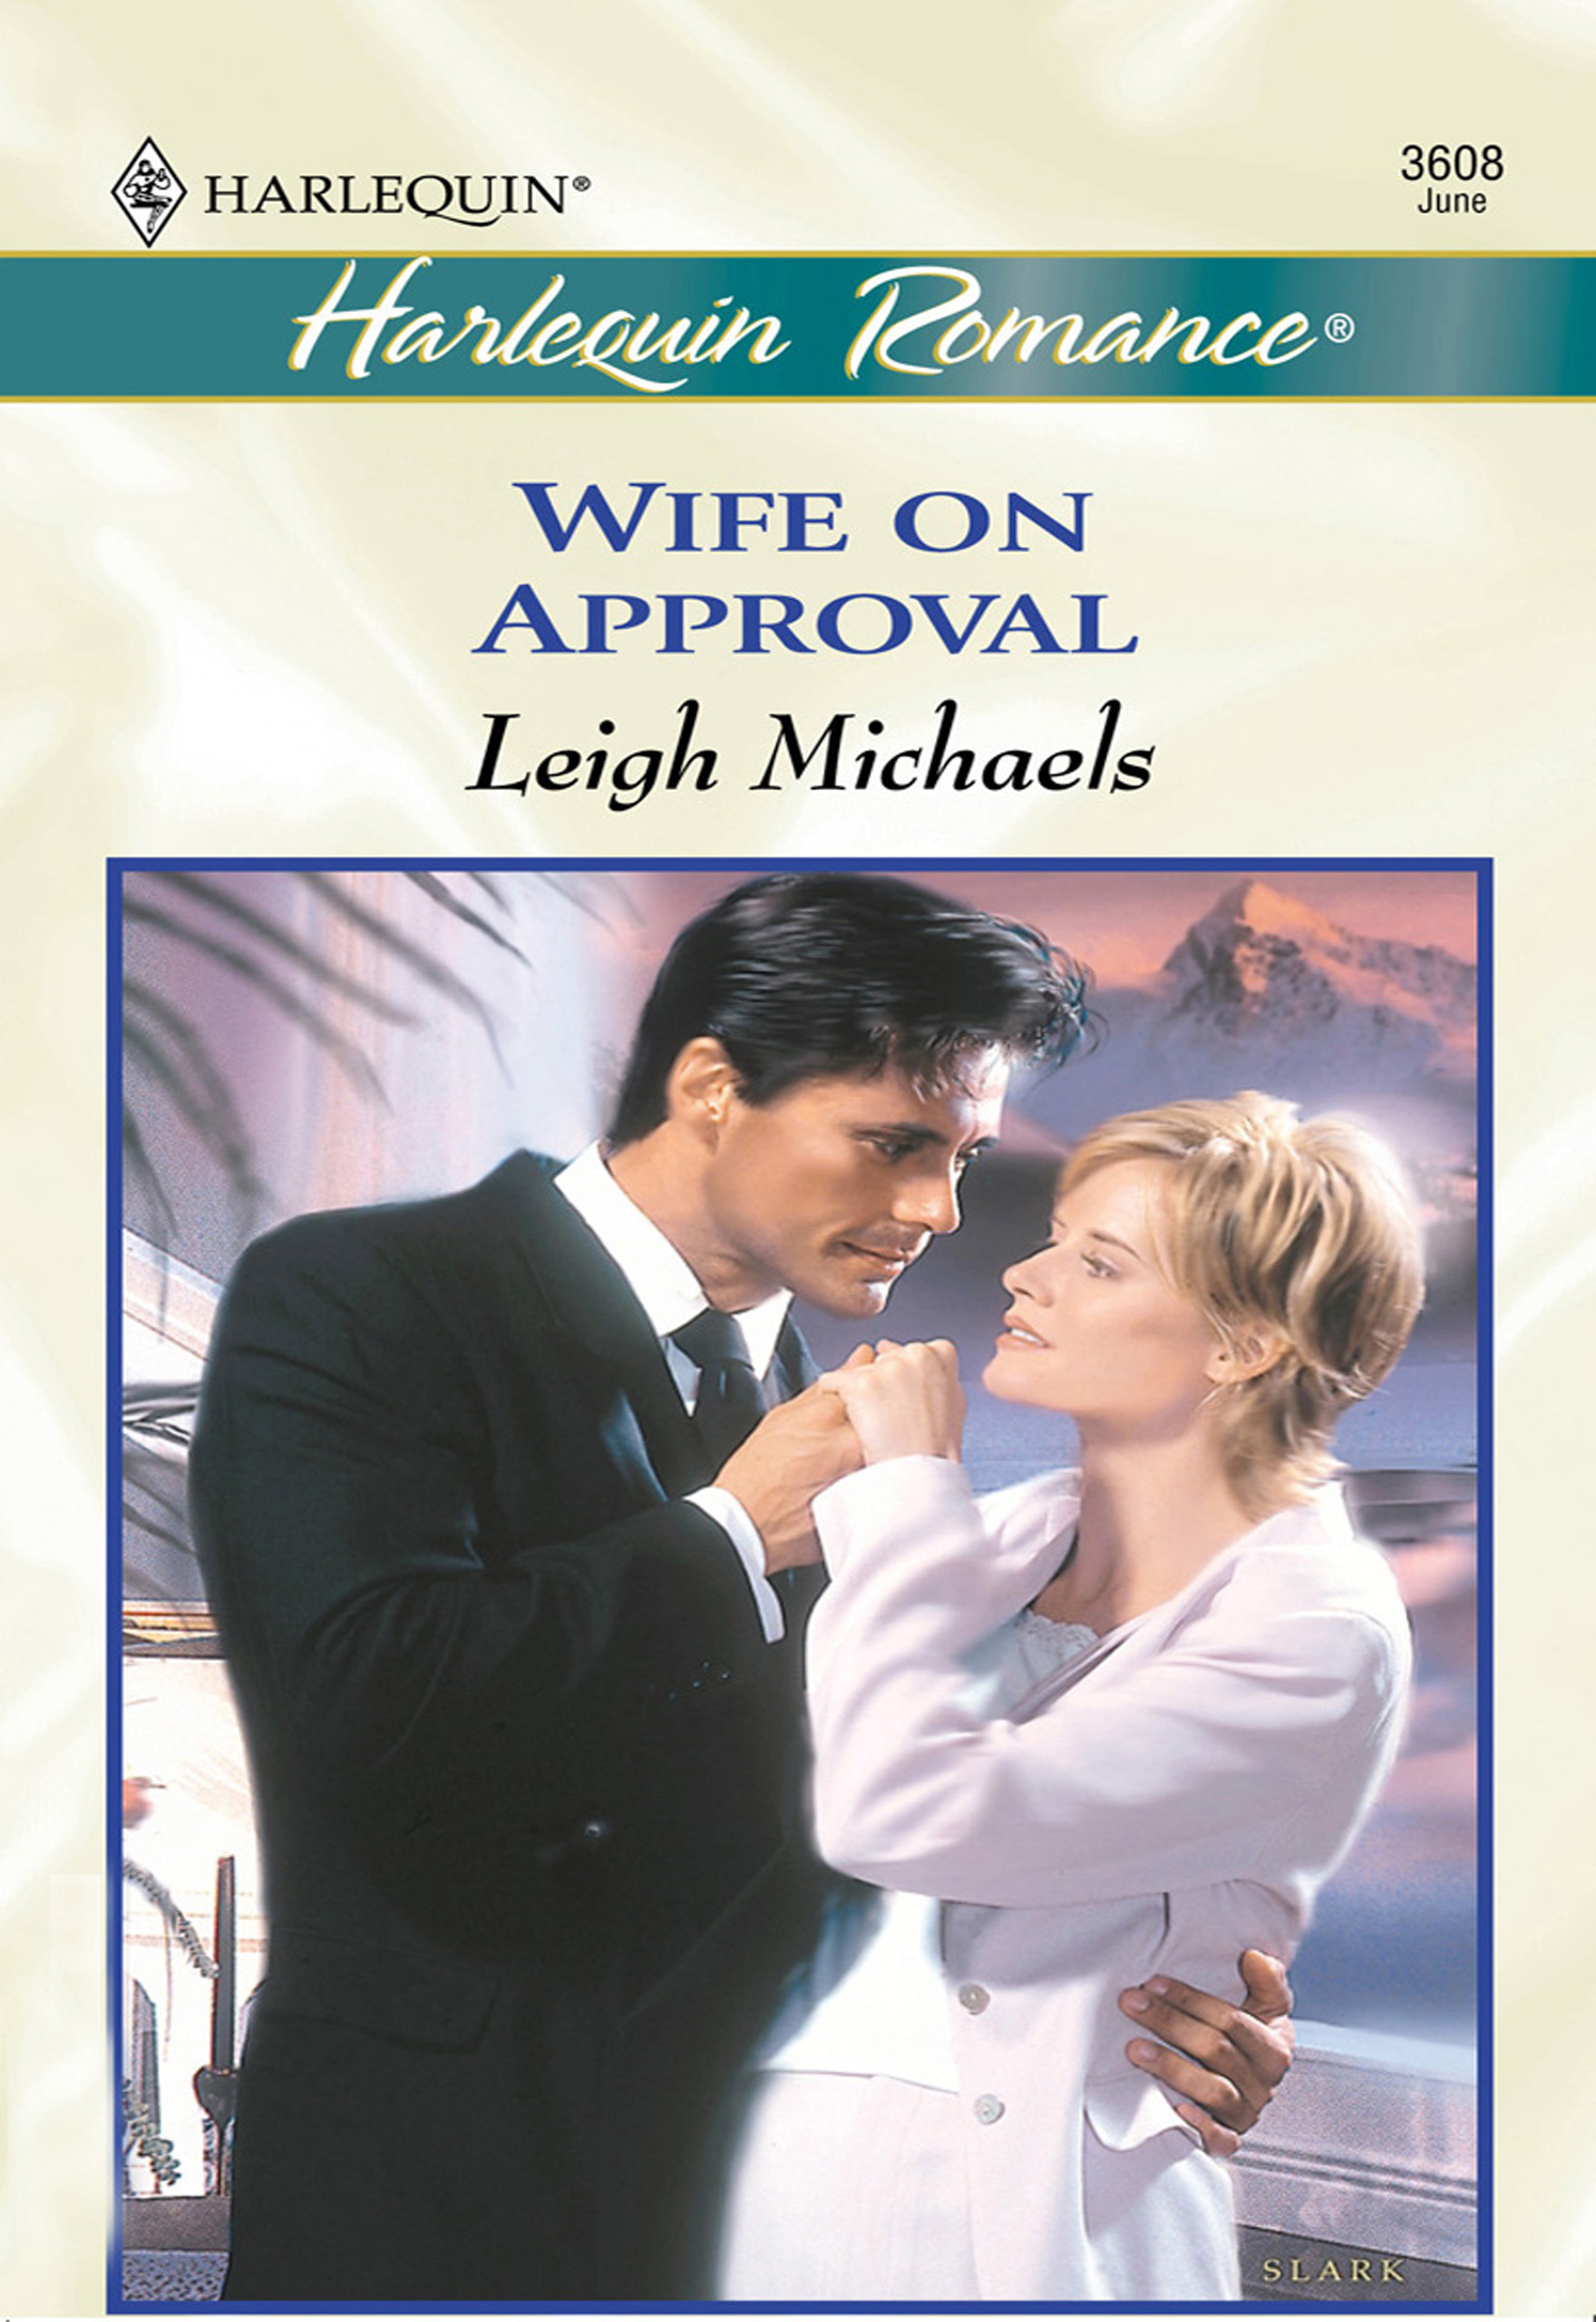 The wife book. Wife on the professional Bachelor.